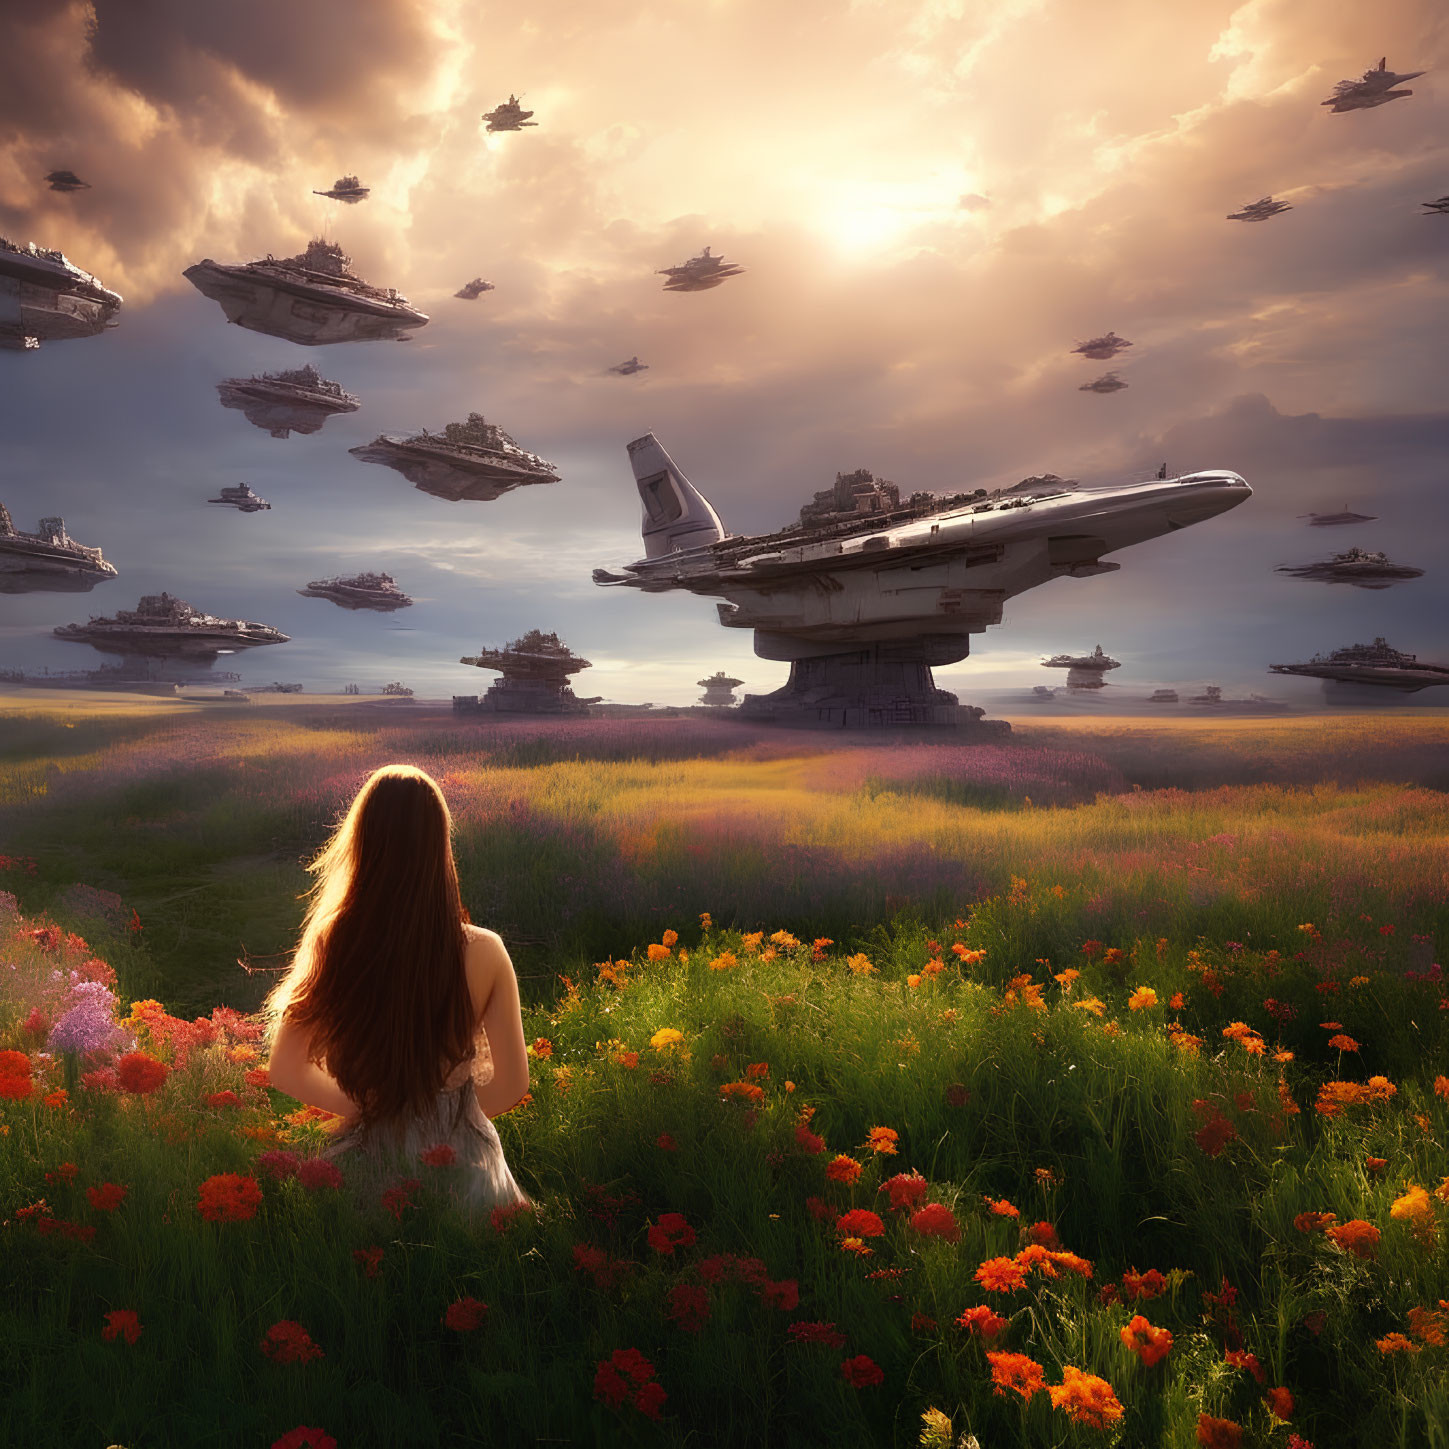 Woman admires wildflowers and starships in serene landscape